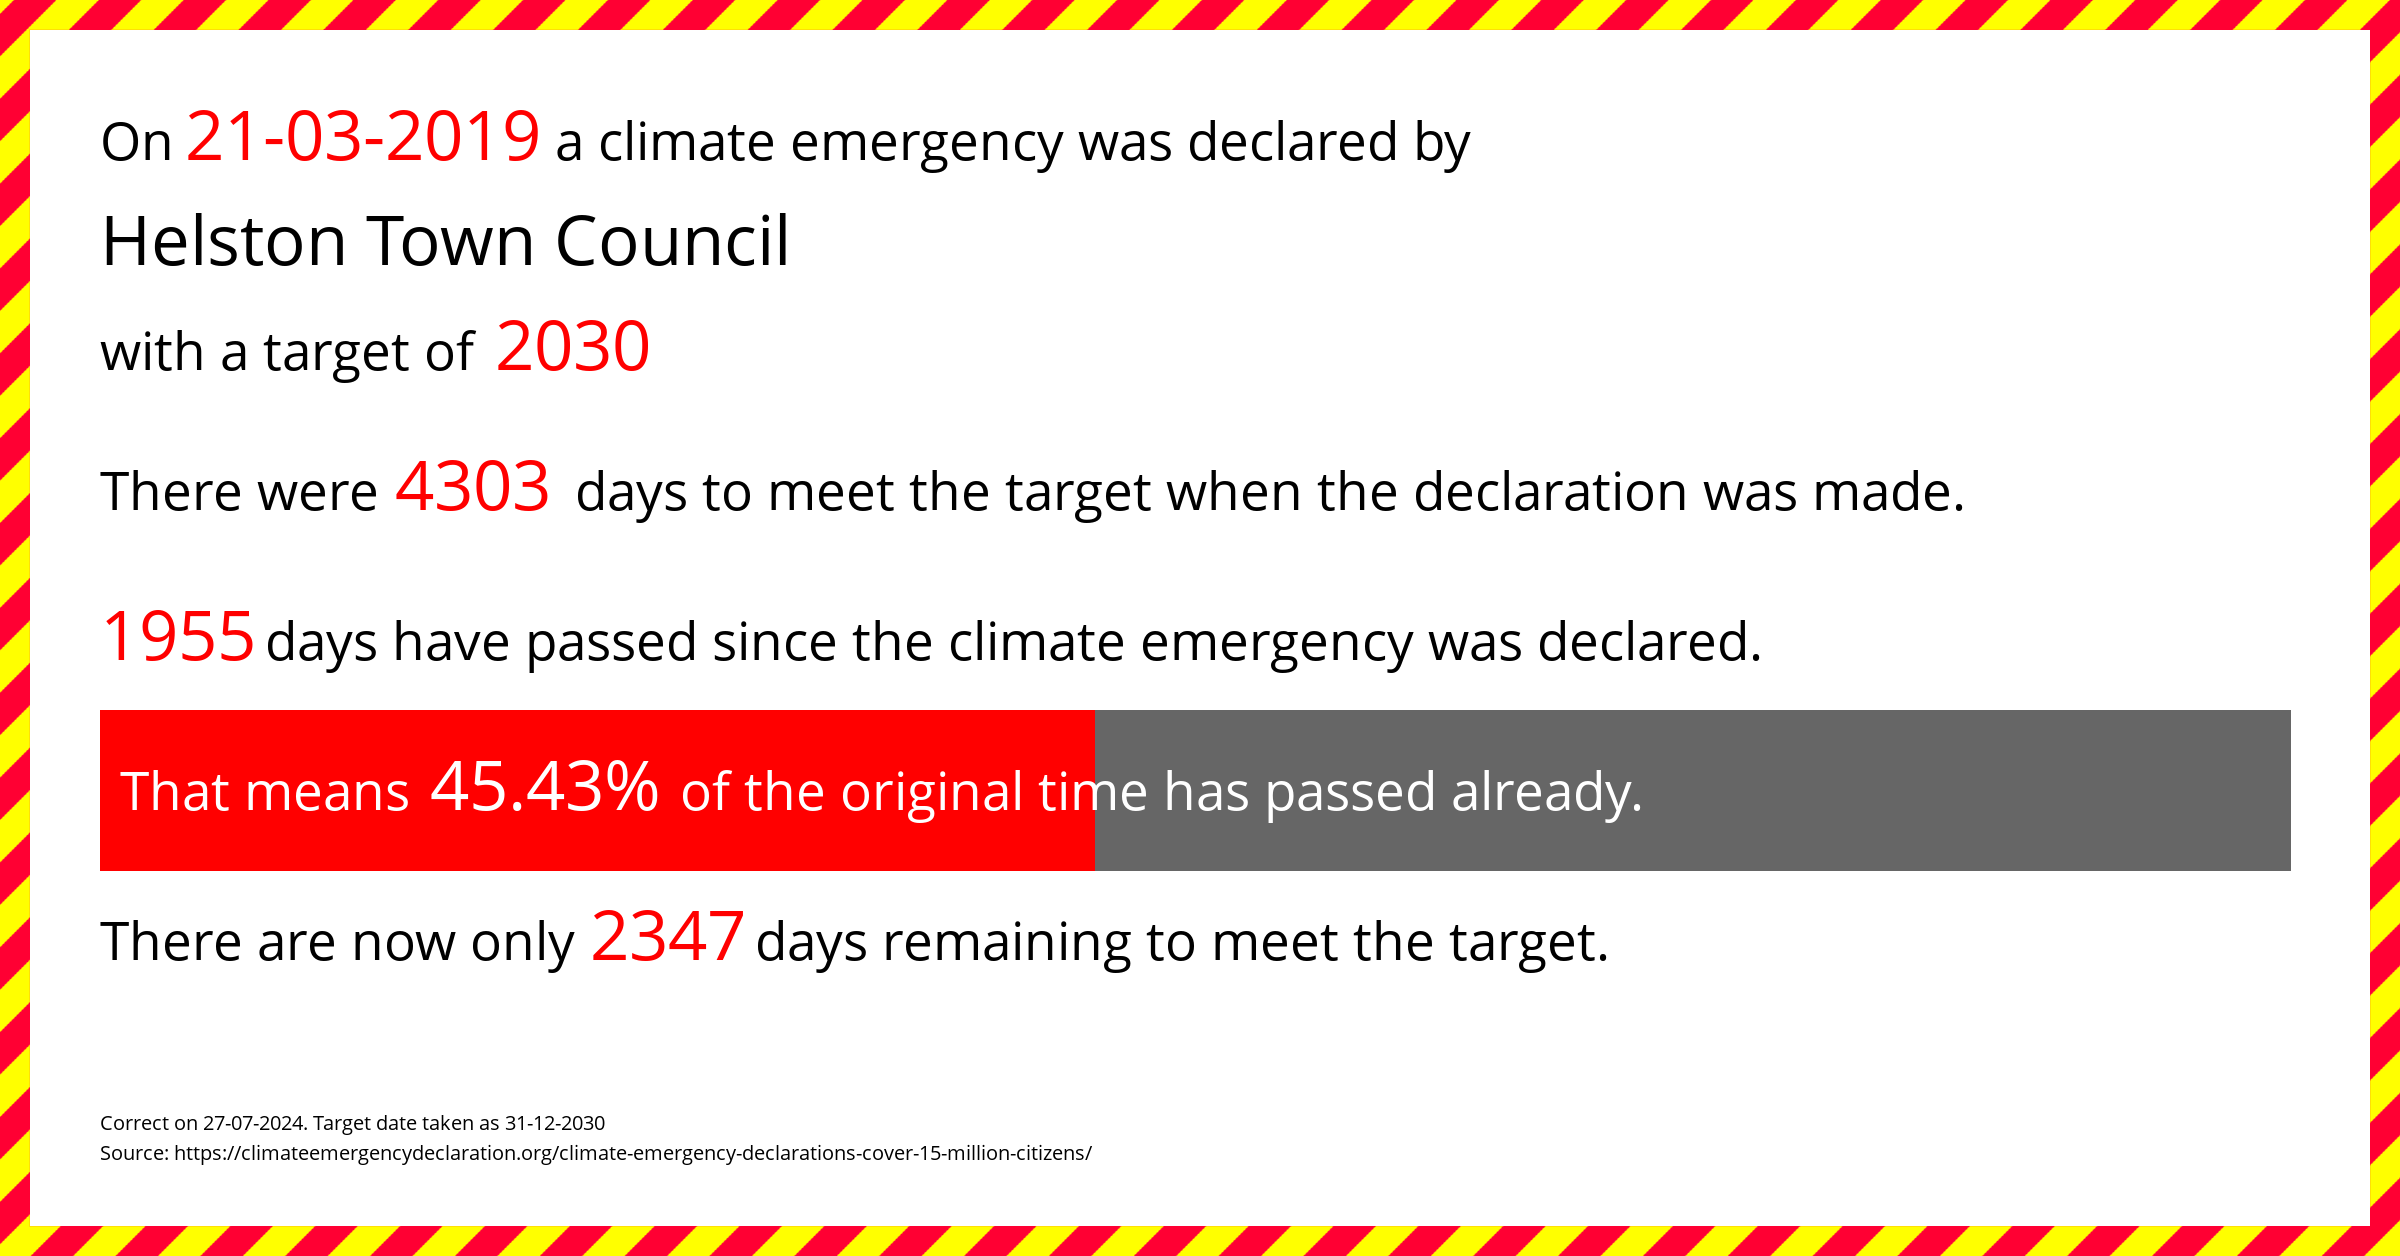 Helston Town Council declared a Climate emergency on Thursday 21st March 2019, with a target of 2030.